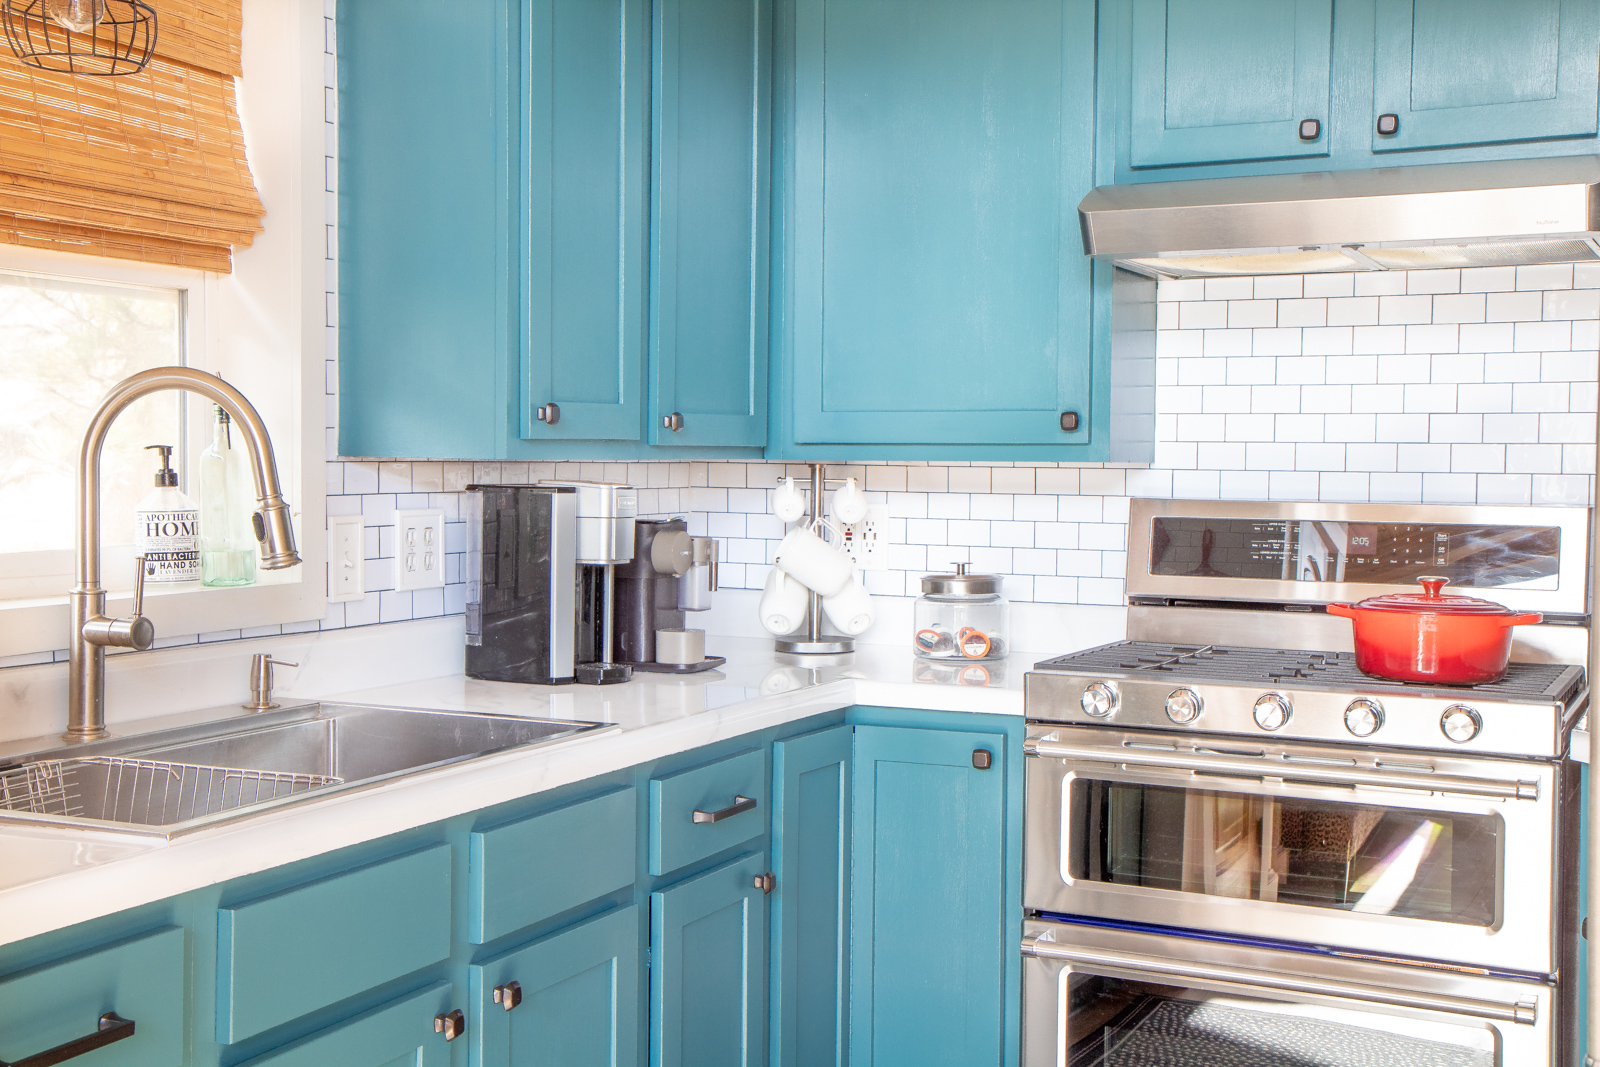 A Budget-Friendly Kitchen Makeover with Turquoise Cabinets & Open